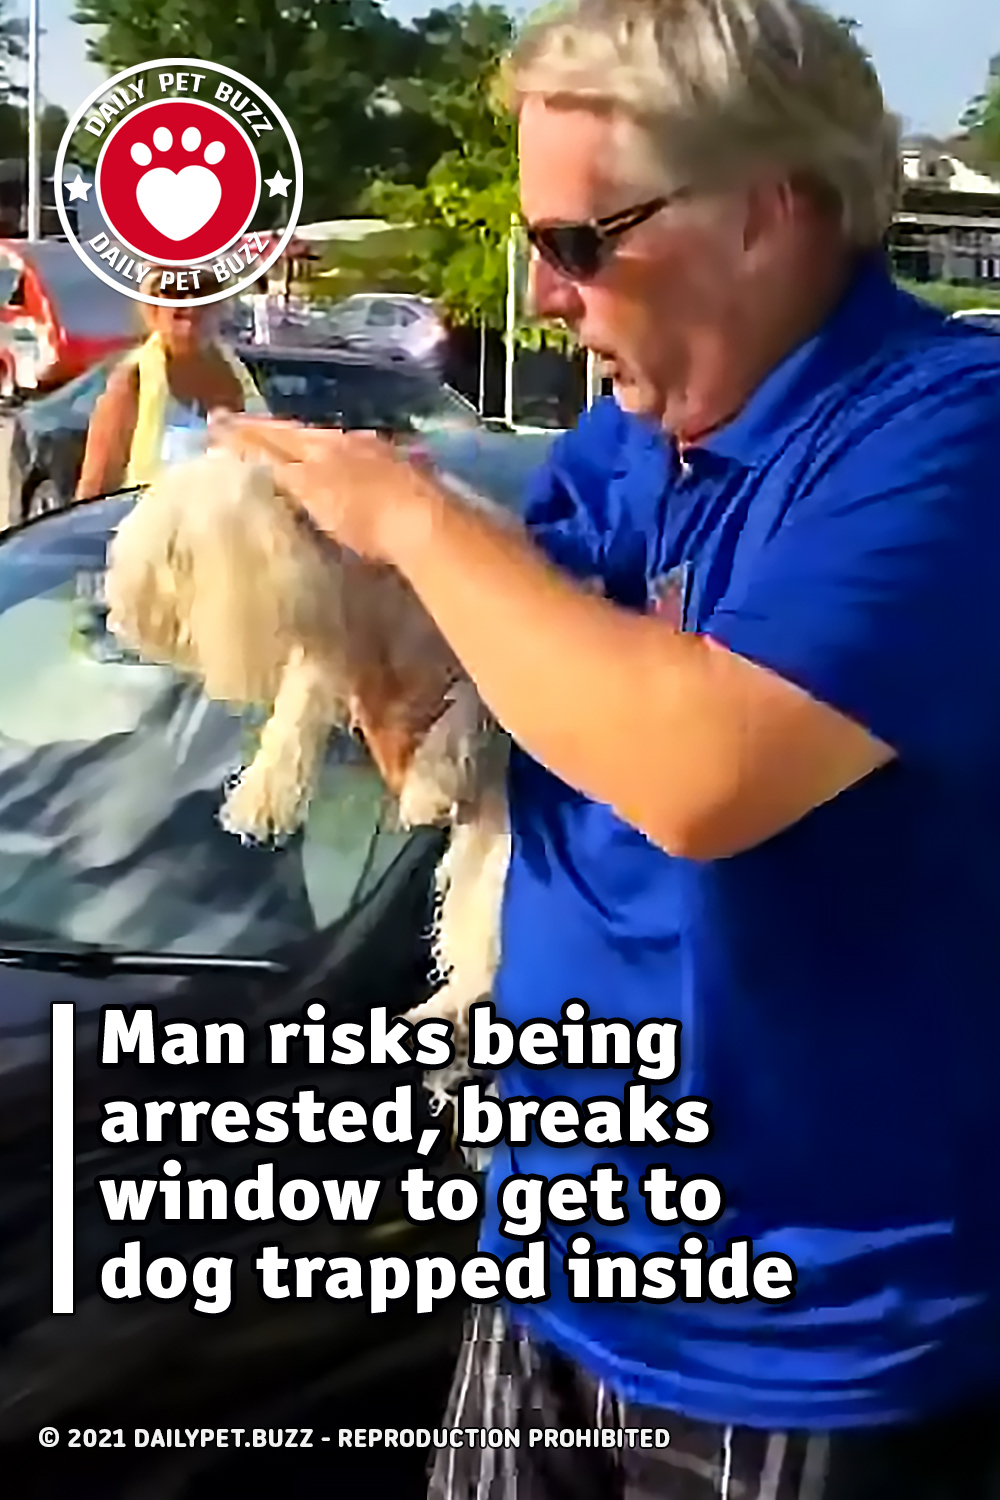 Man risks being arrested, breaks window to get to dog trapped inside